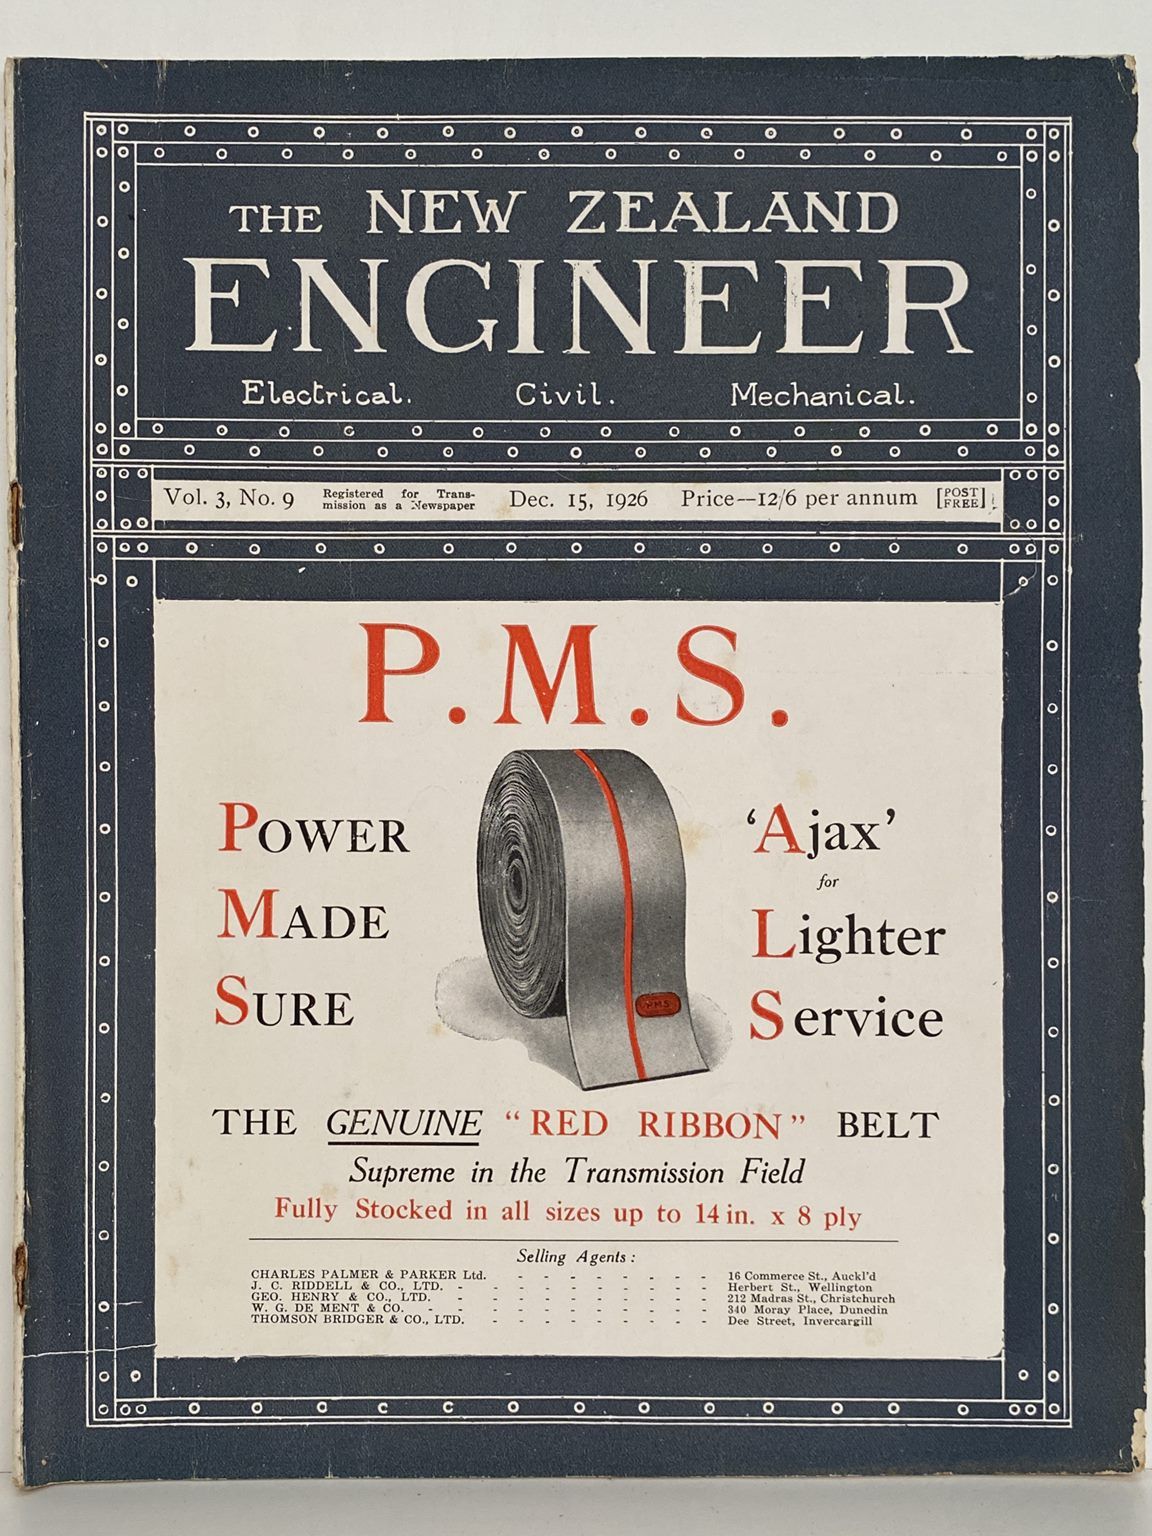 OLD MAGAZINE: The New Zealand Engineer Vol. 3, No. 9 - 15 December 1926